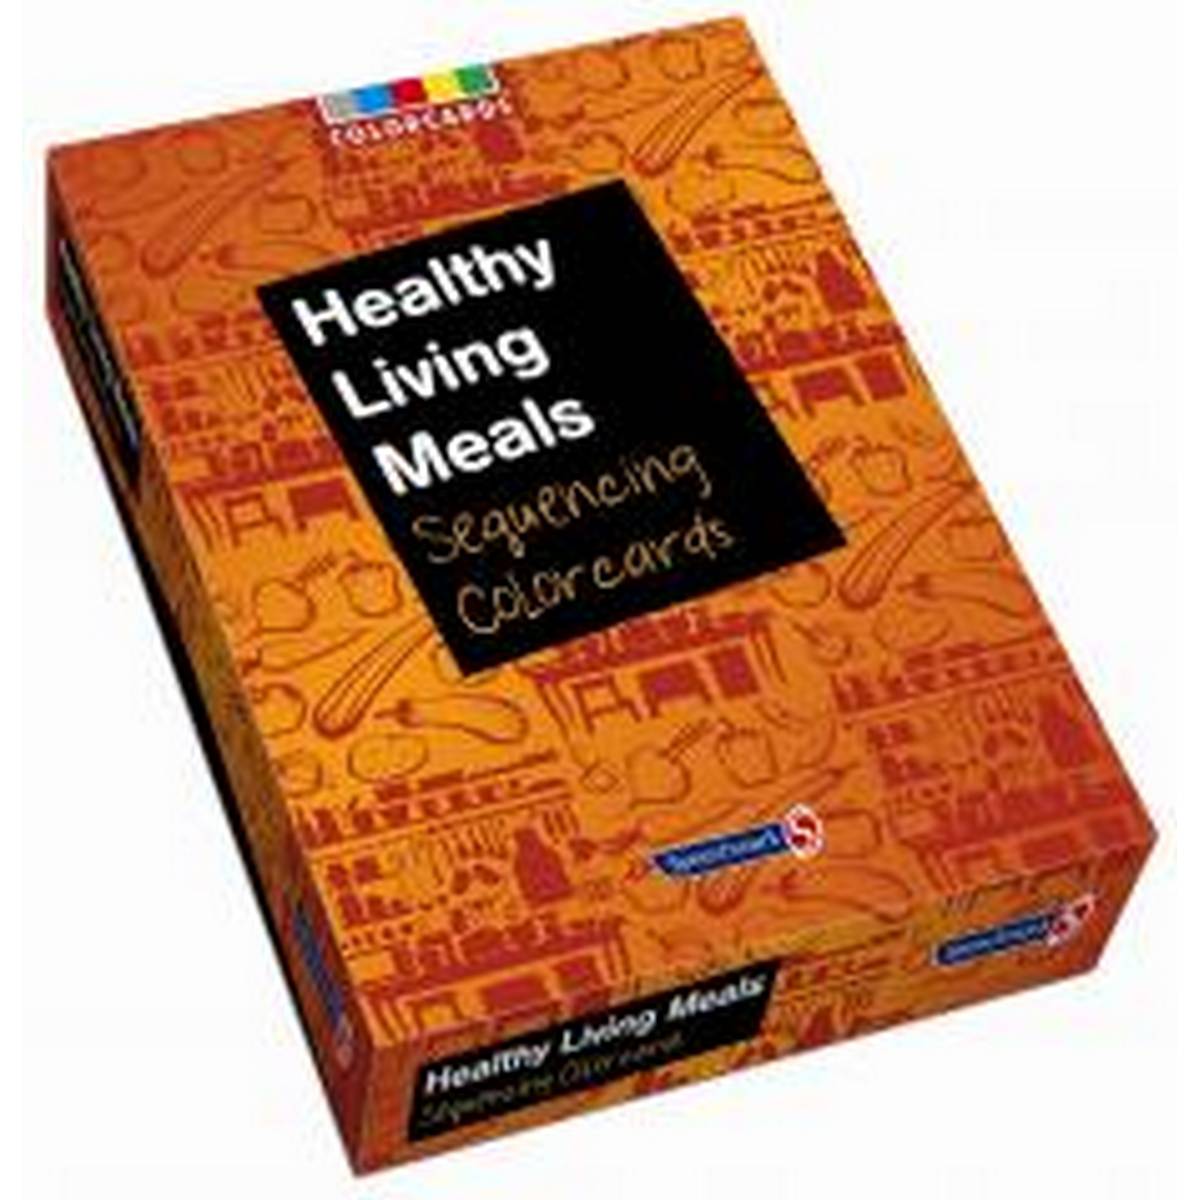 ColorCards: Healthy Living Meals